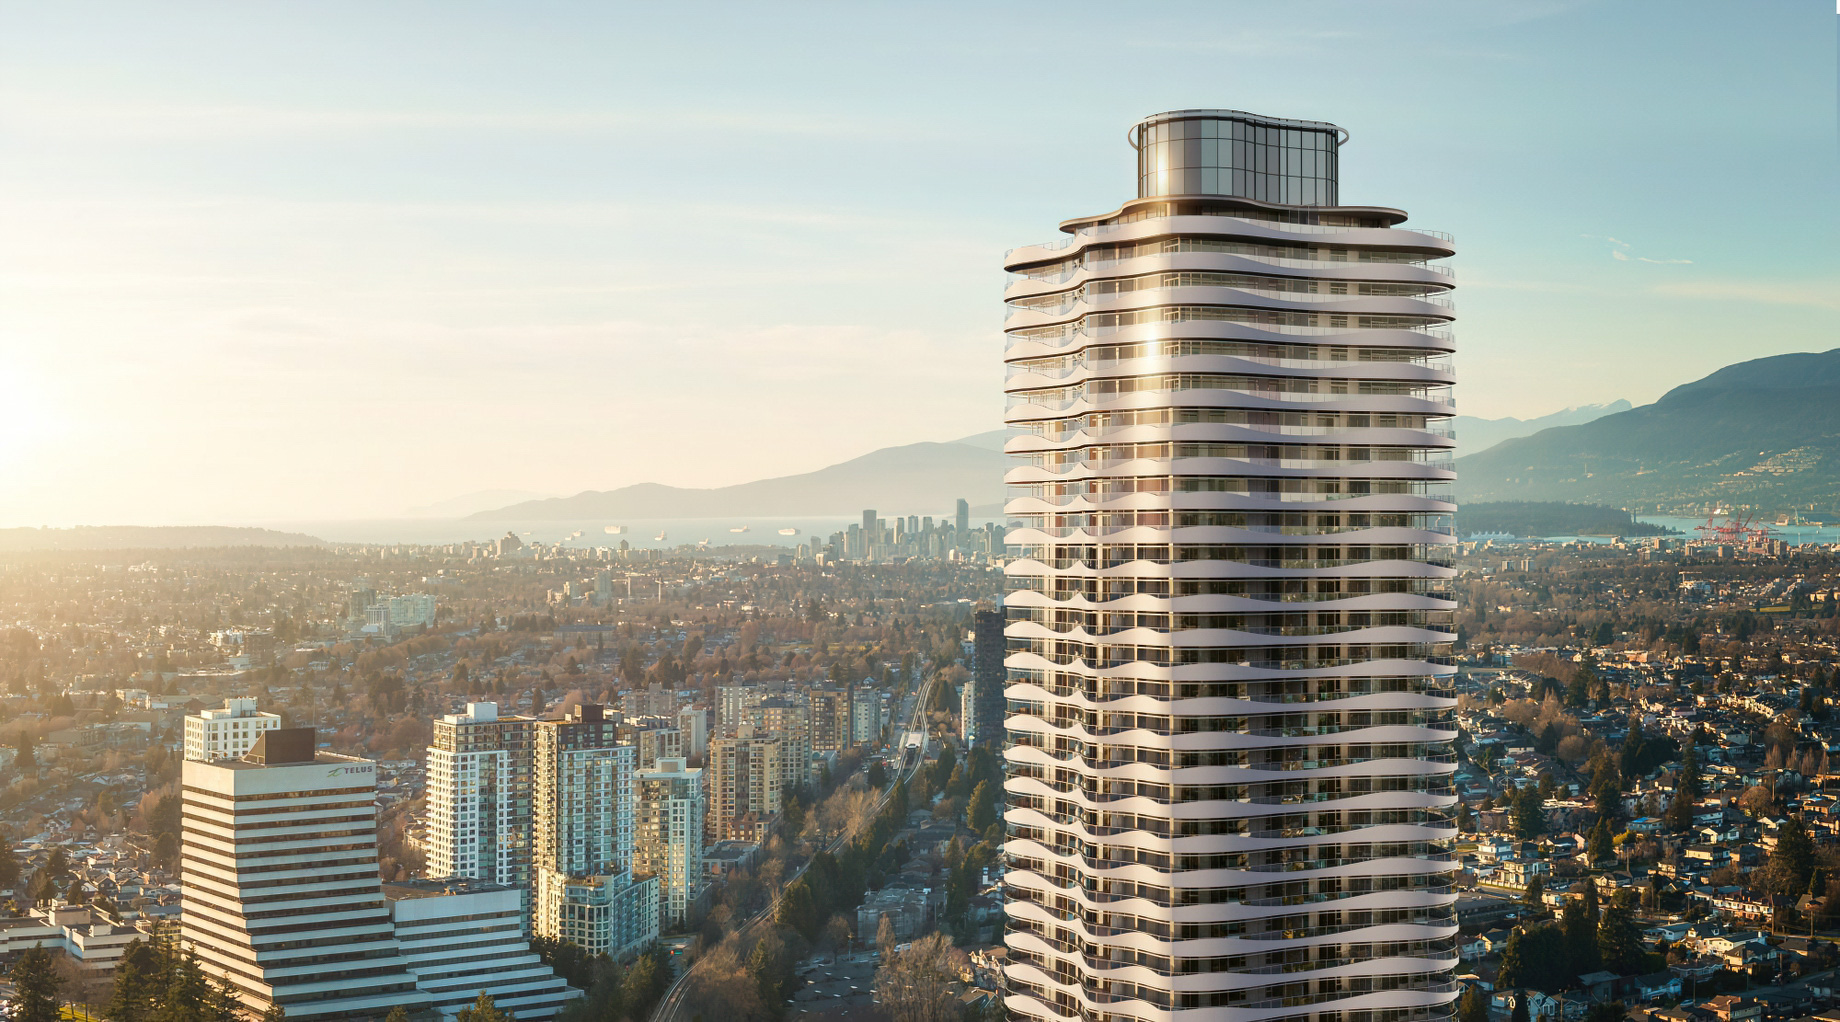 Modern Architecture Reviving Old-World Elegance - GREENHOUSE Brings Sophisticated Luxury Condo Living to Burnaby’s Metrotown